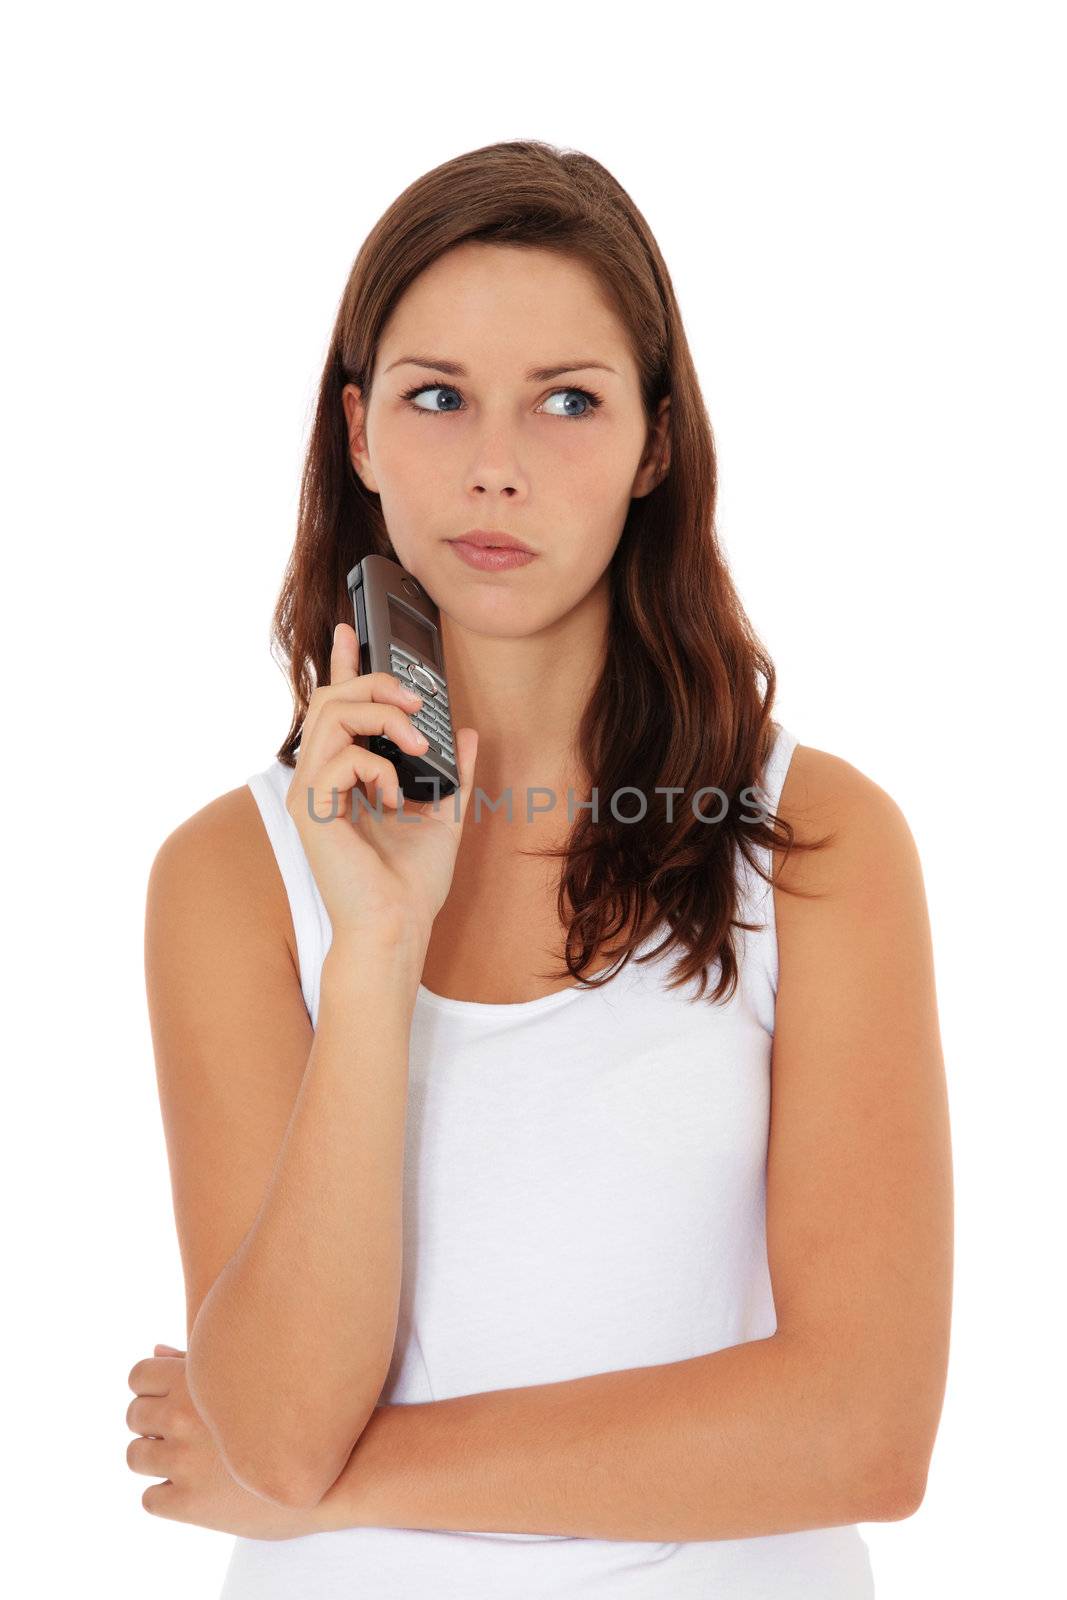 Attractive young woman awaits a phone call. All on white background.